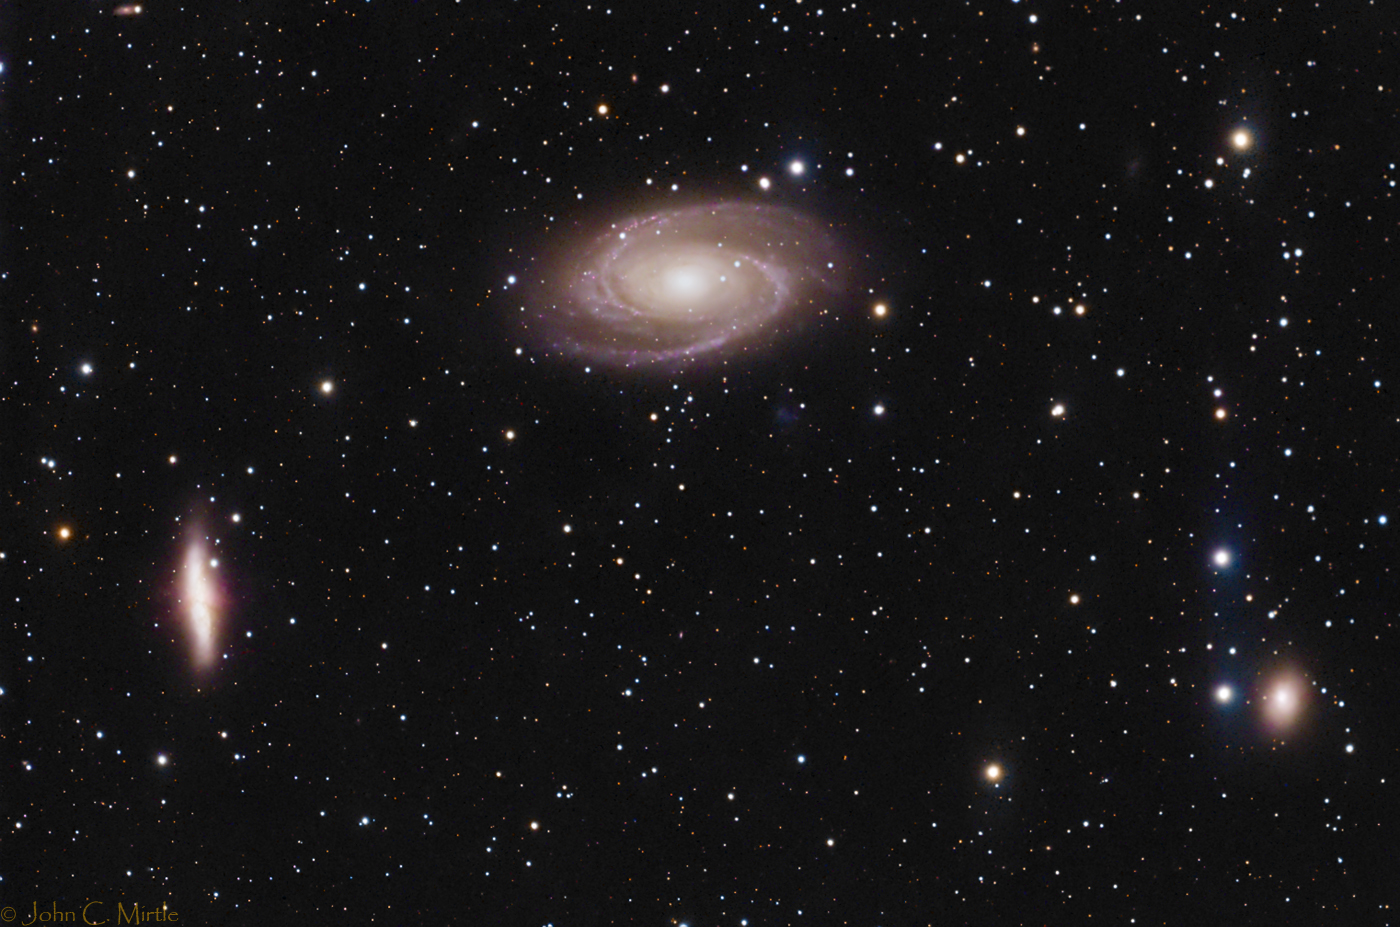 Galaxies Messier 81, Messier 82, NGC3077